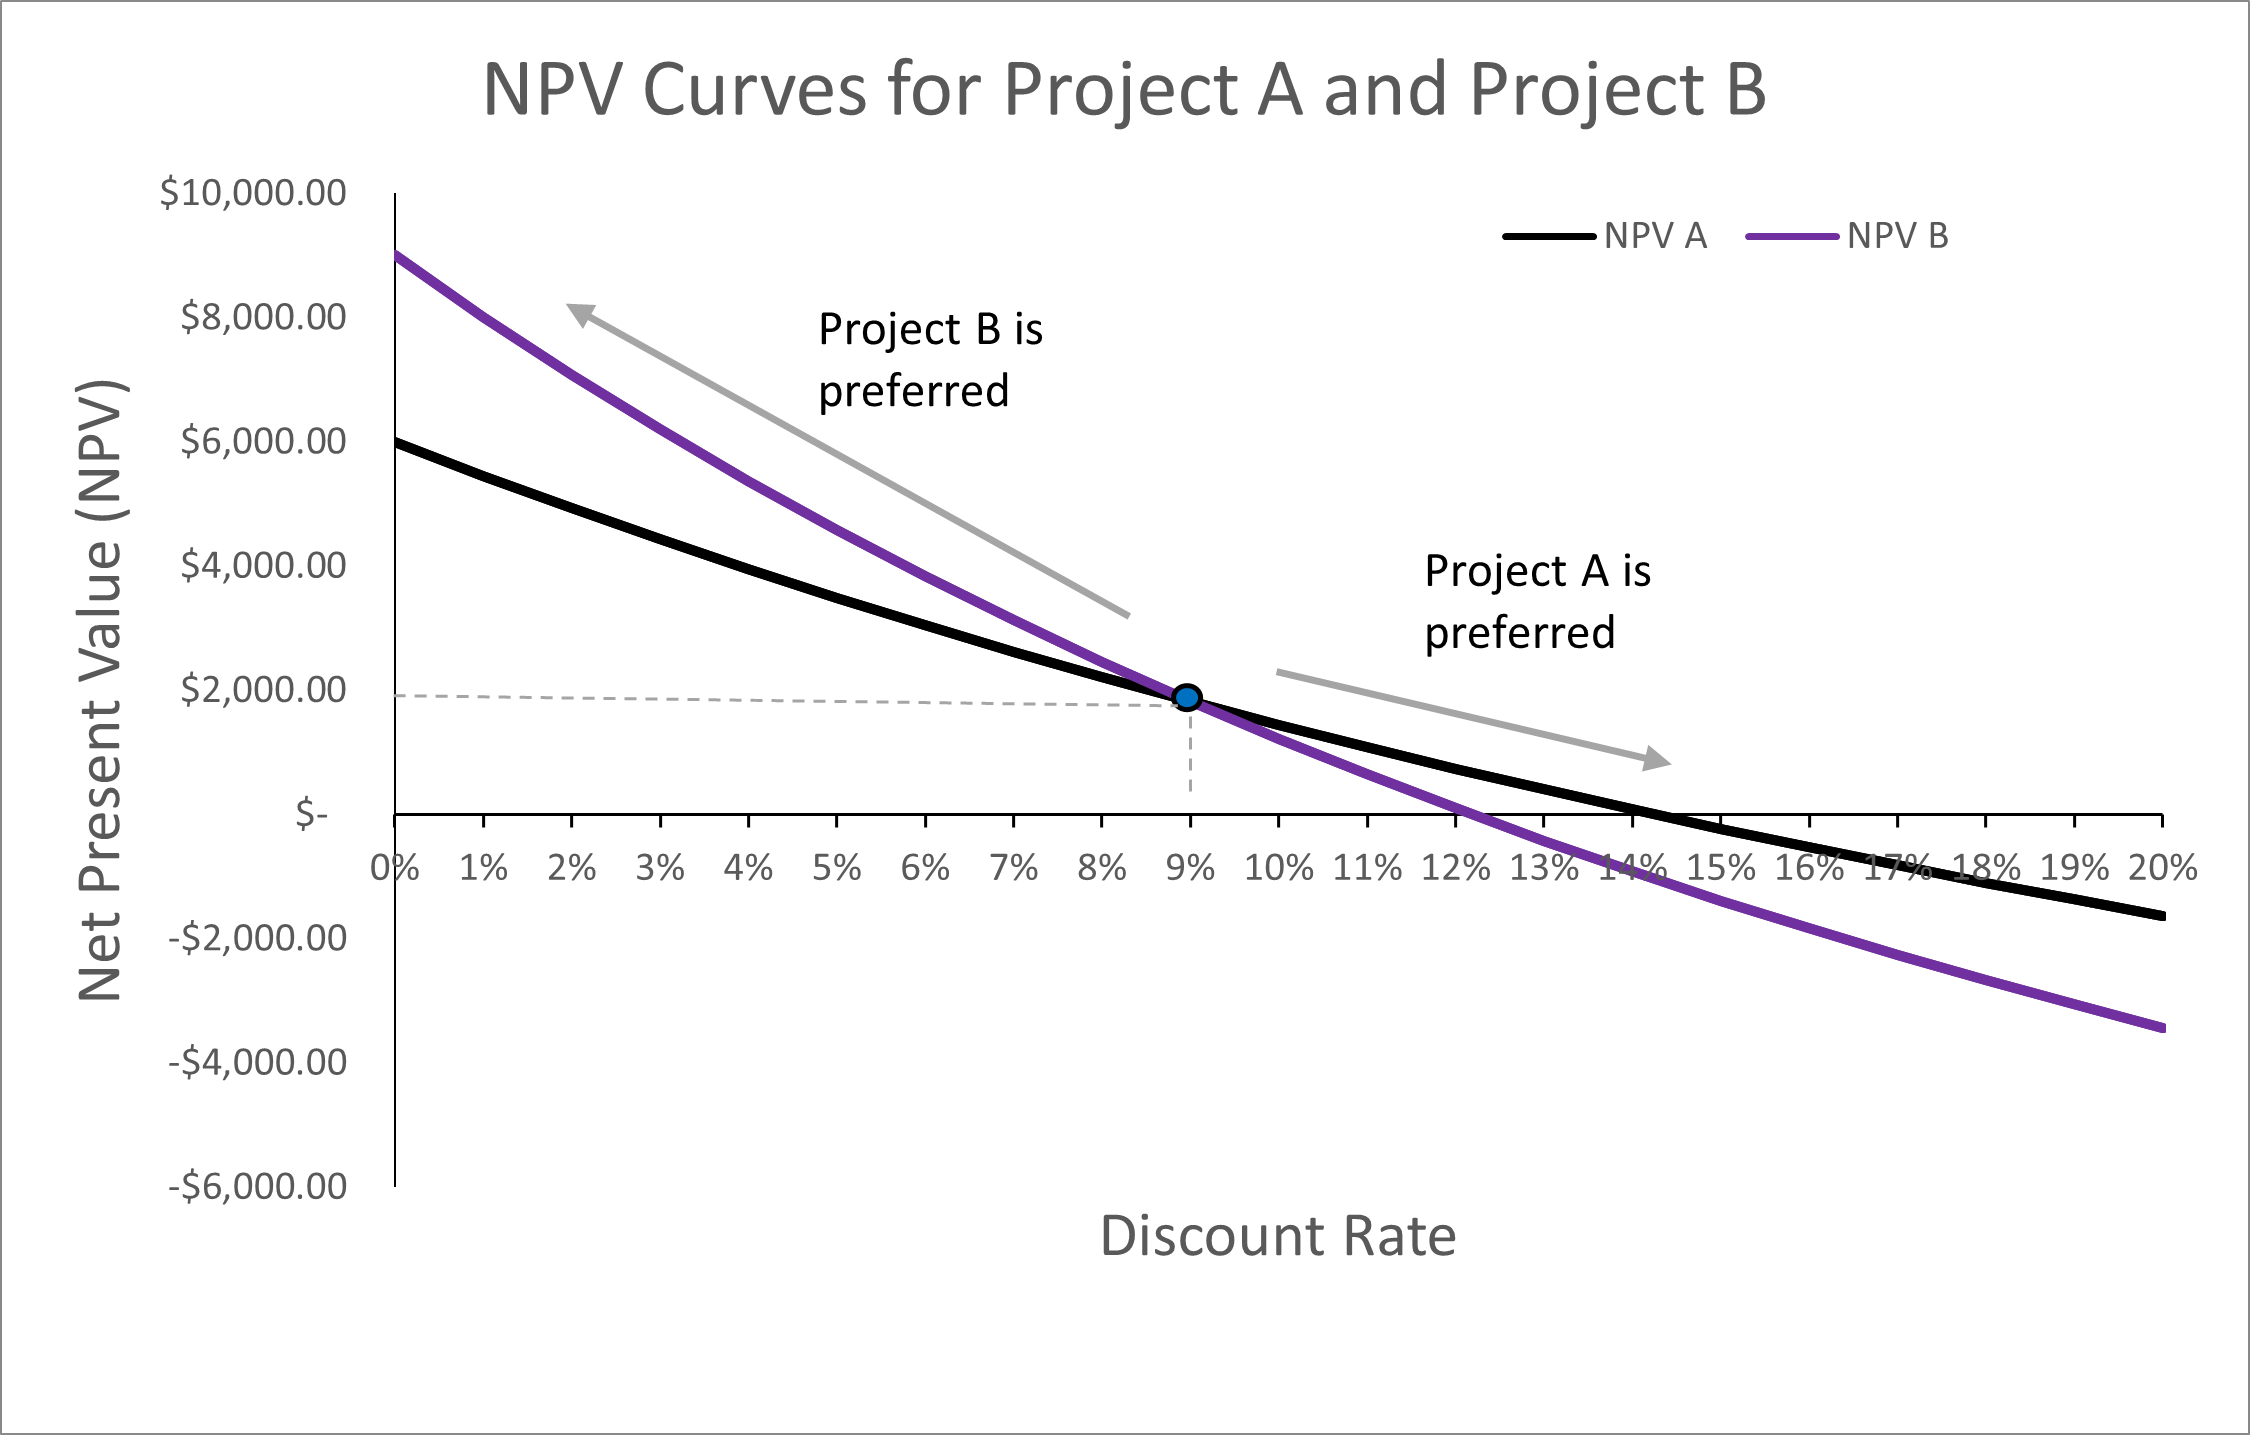 The NPV curves of Project A and Project B. The NPV of Project B is higher than Project A when the discount rate is less than 9%